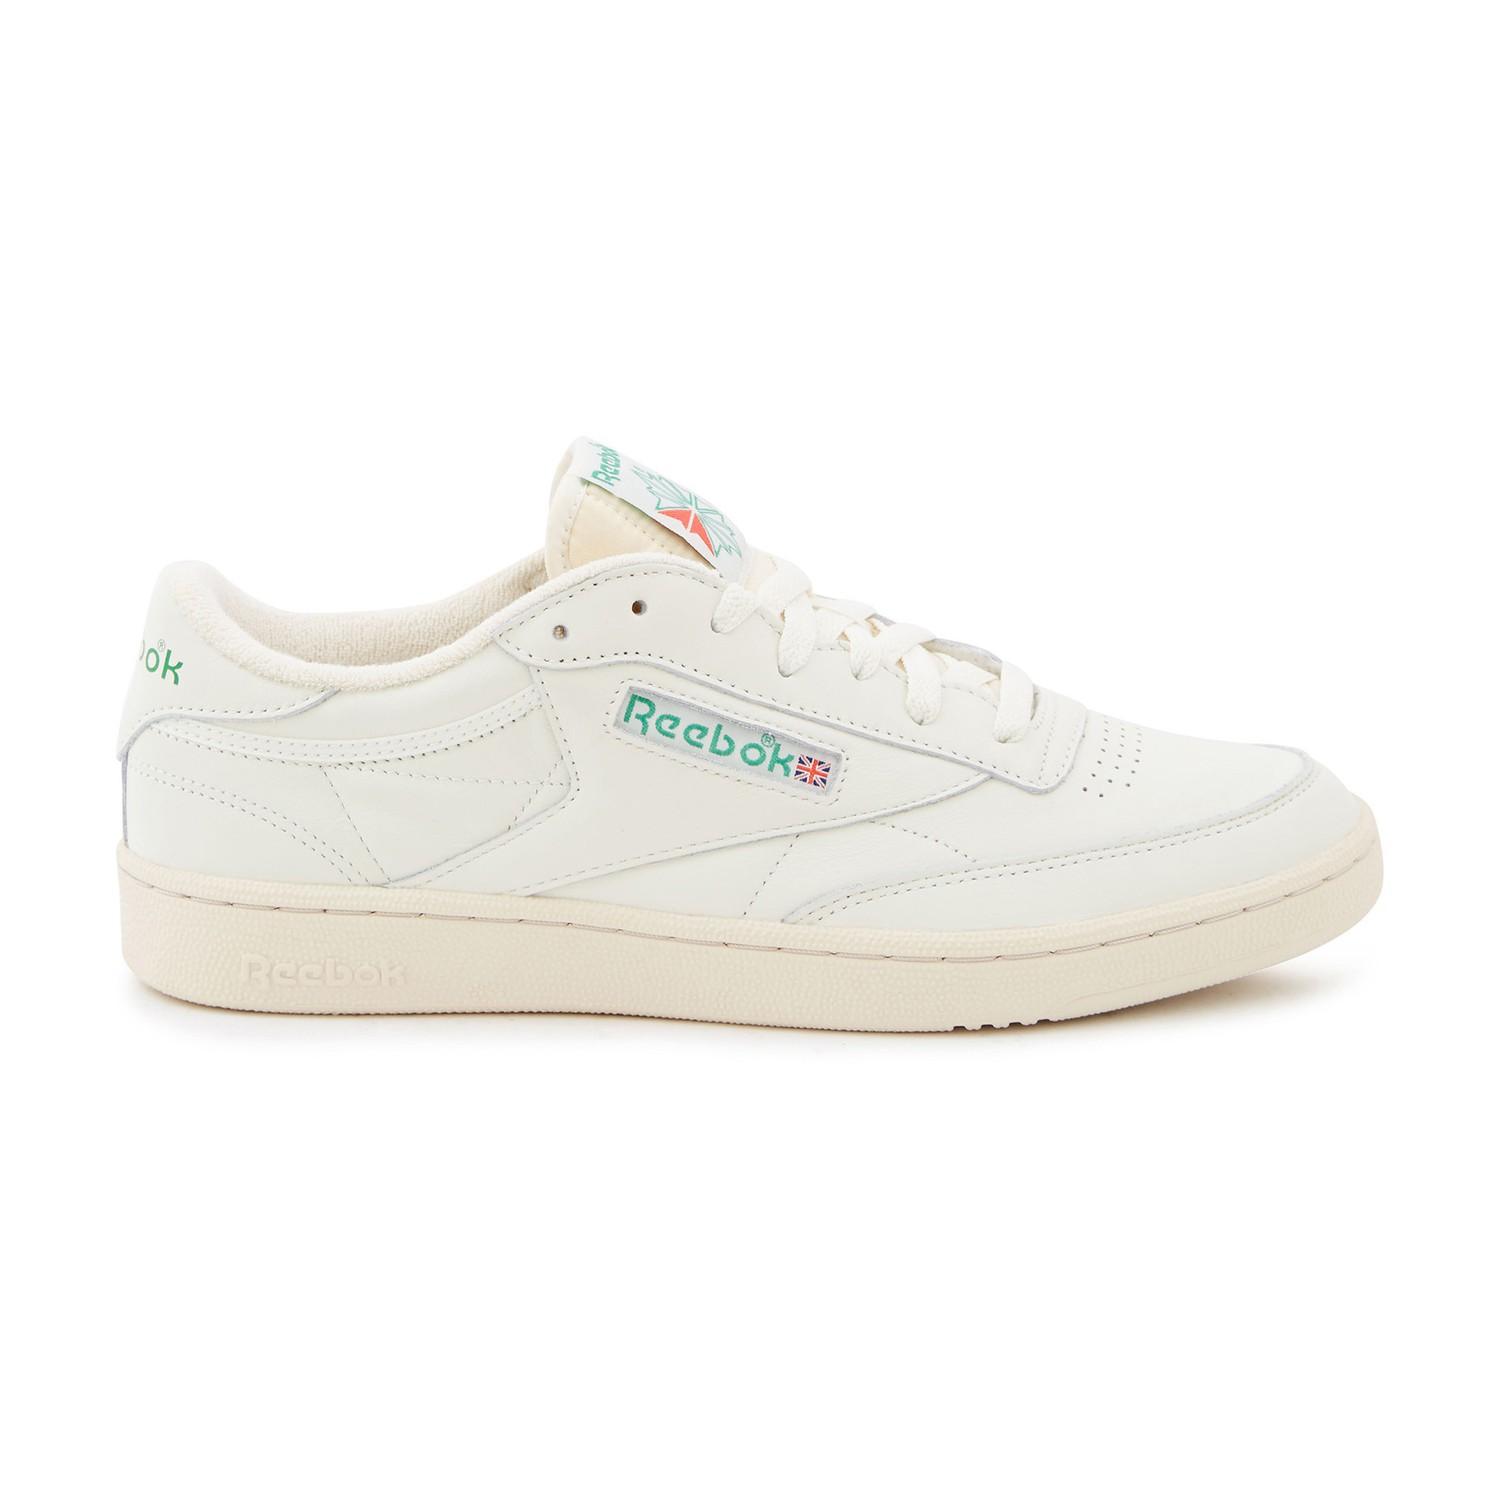 Reebok Leather Club C 1985 Tv Trainers in Chalk (White) for Men - Lyst